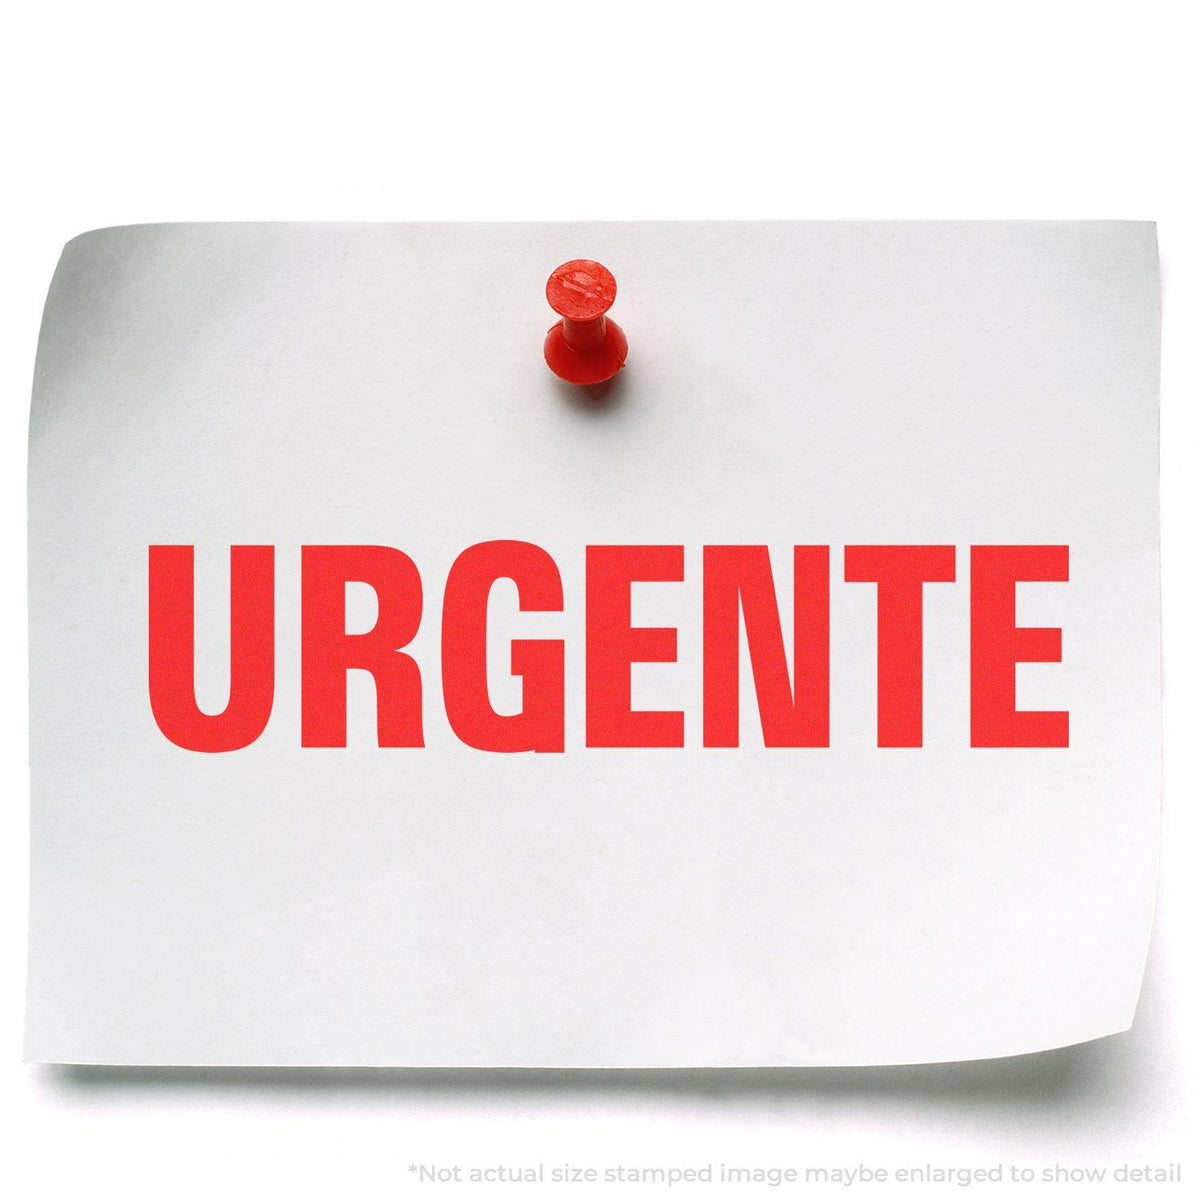 Urgente Rubber Stamp In Use Photo